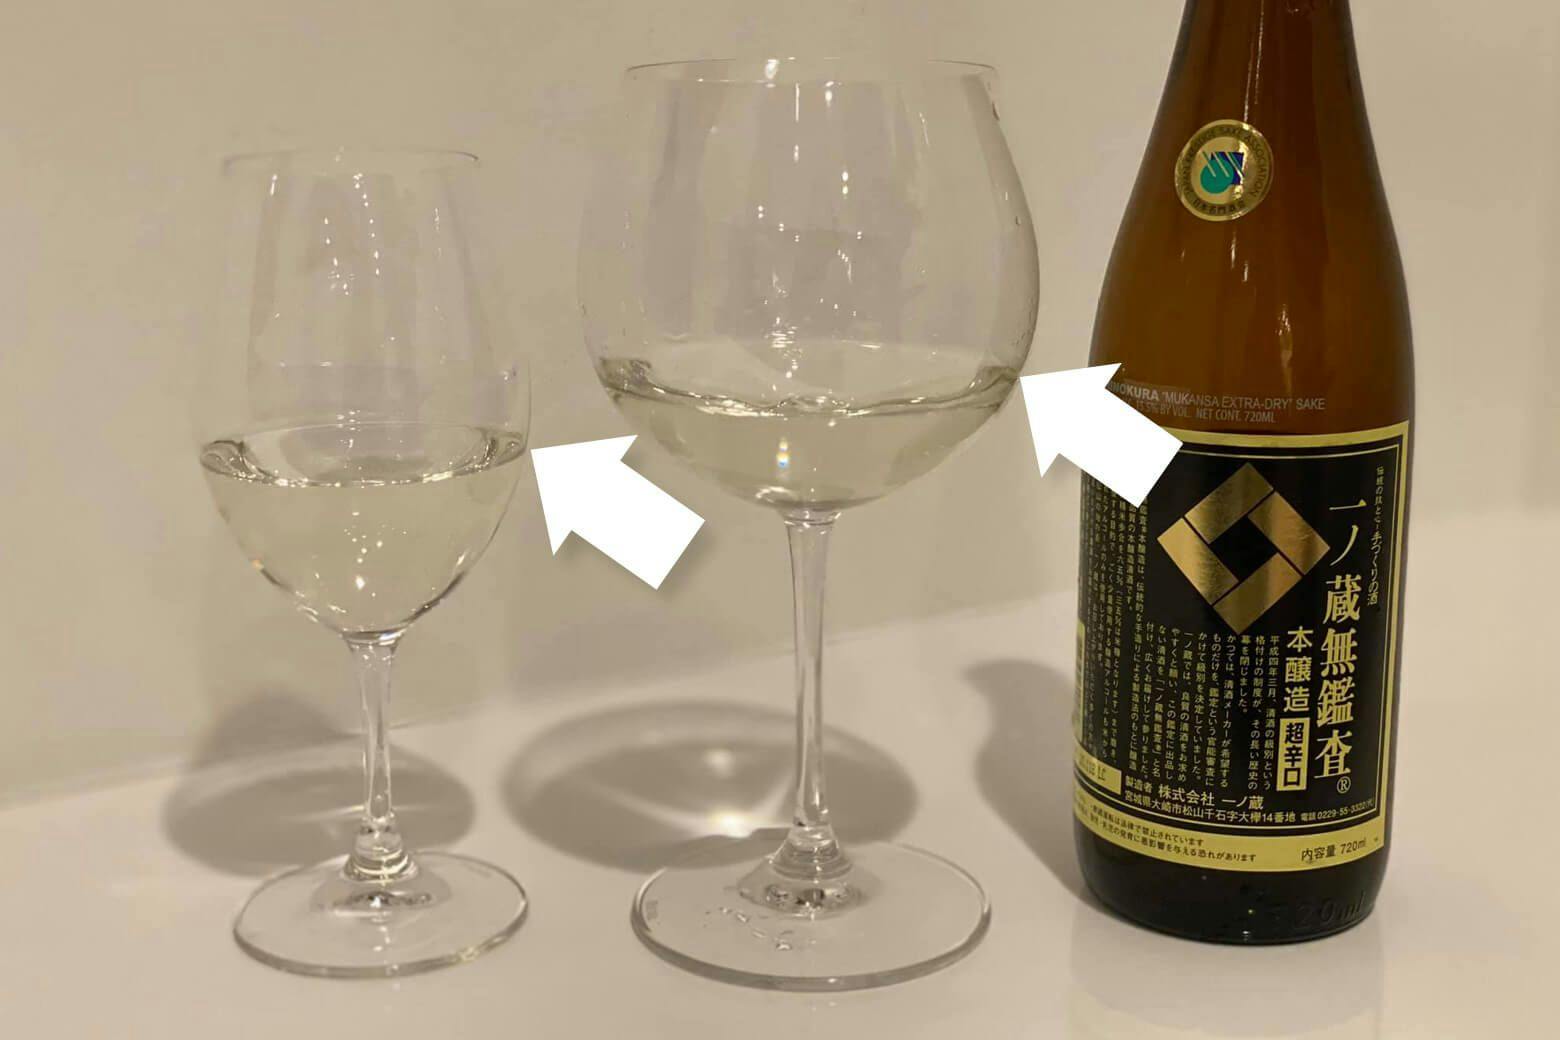 Compare with different shape of wine glasses